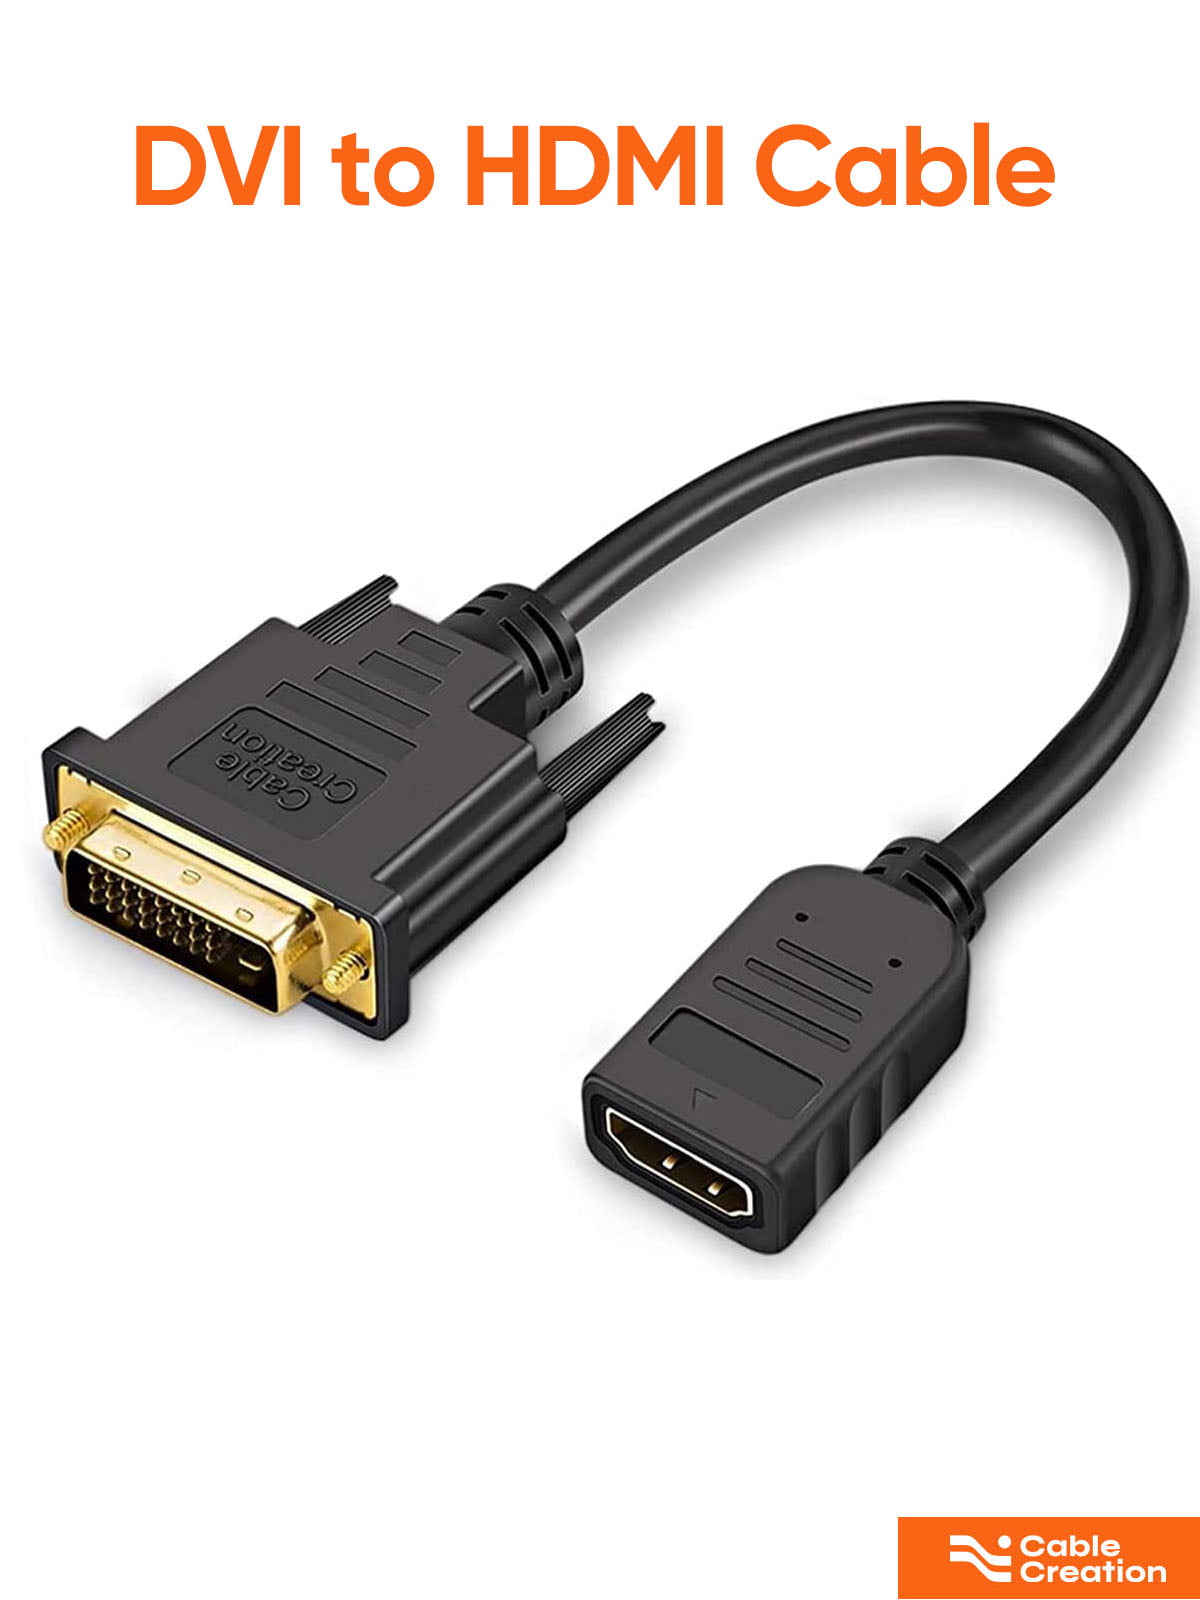 0.5ft DVI to HDMI Short Cable, Bi-Directional HDMI Female DVI-D(24+1) Adapter, HDMI to DVI-D 1080P Converter for PC,TV Box, PS5, Blue-ray, - Walmart.com